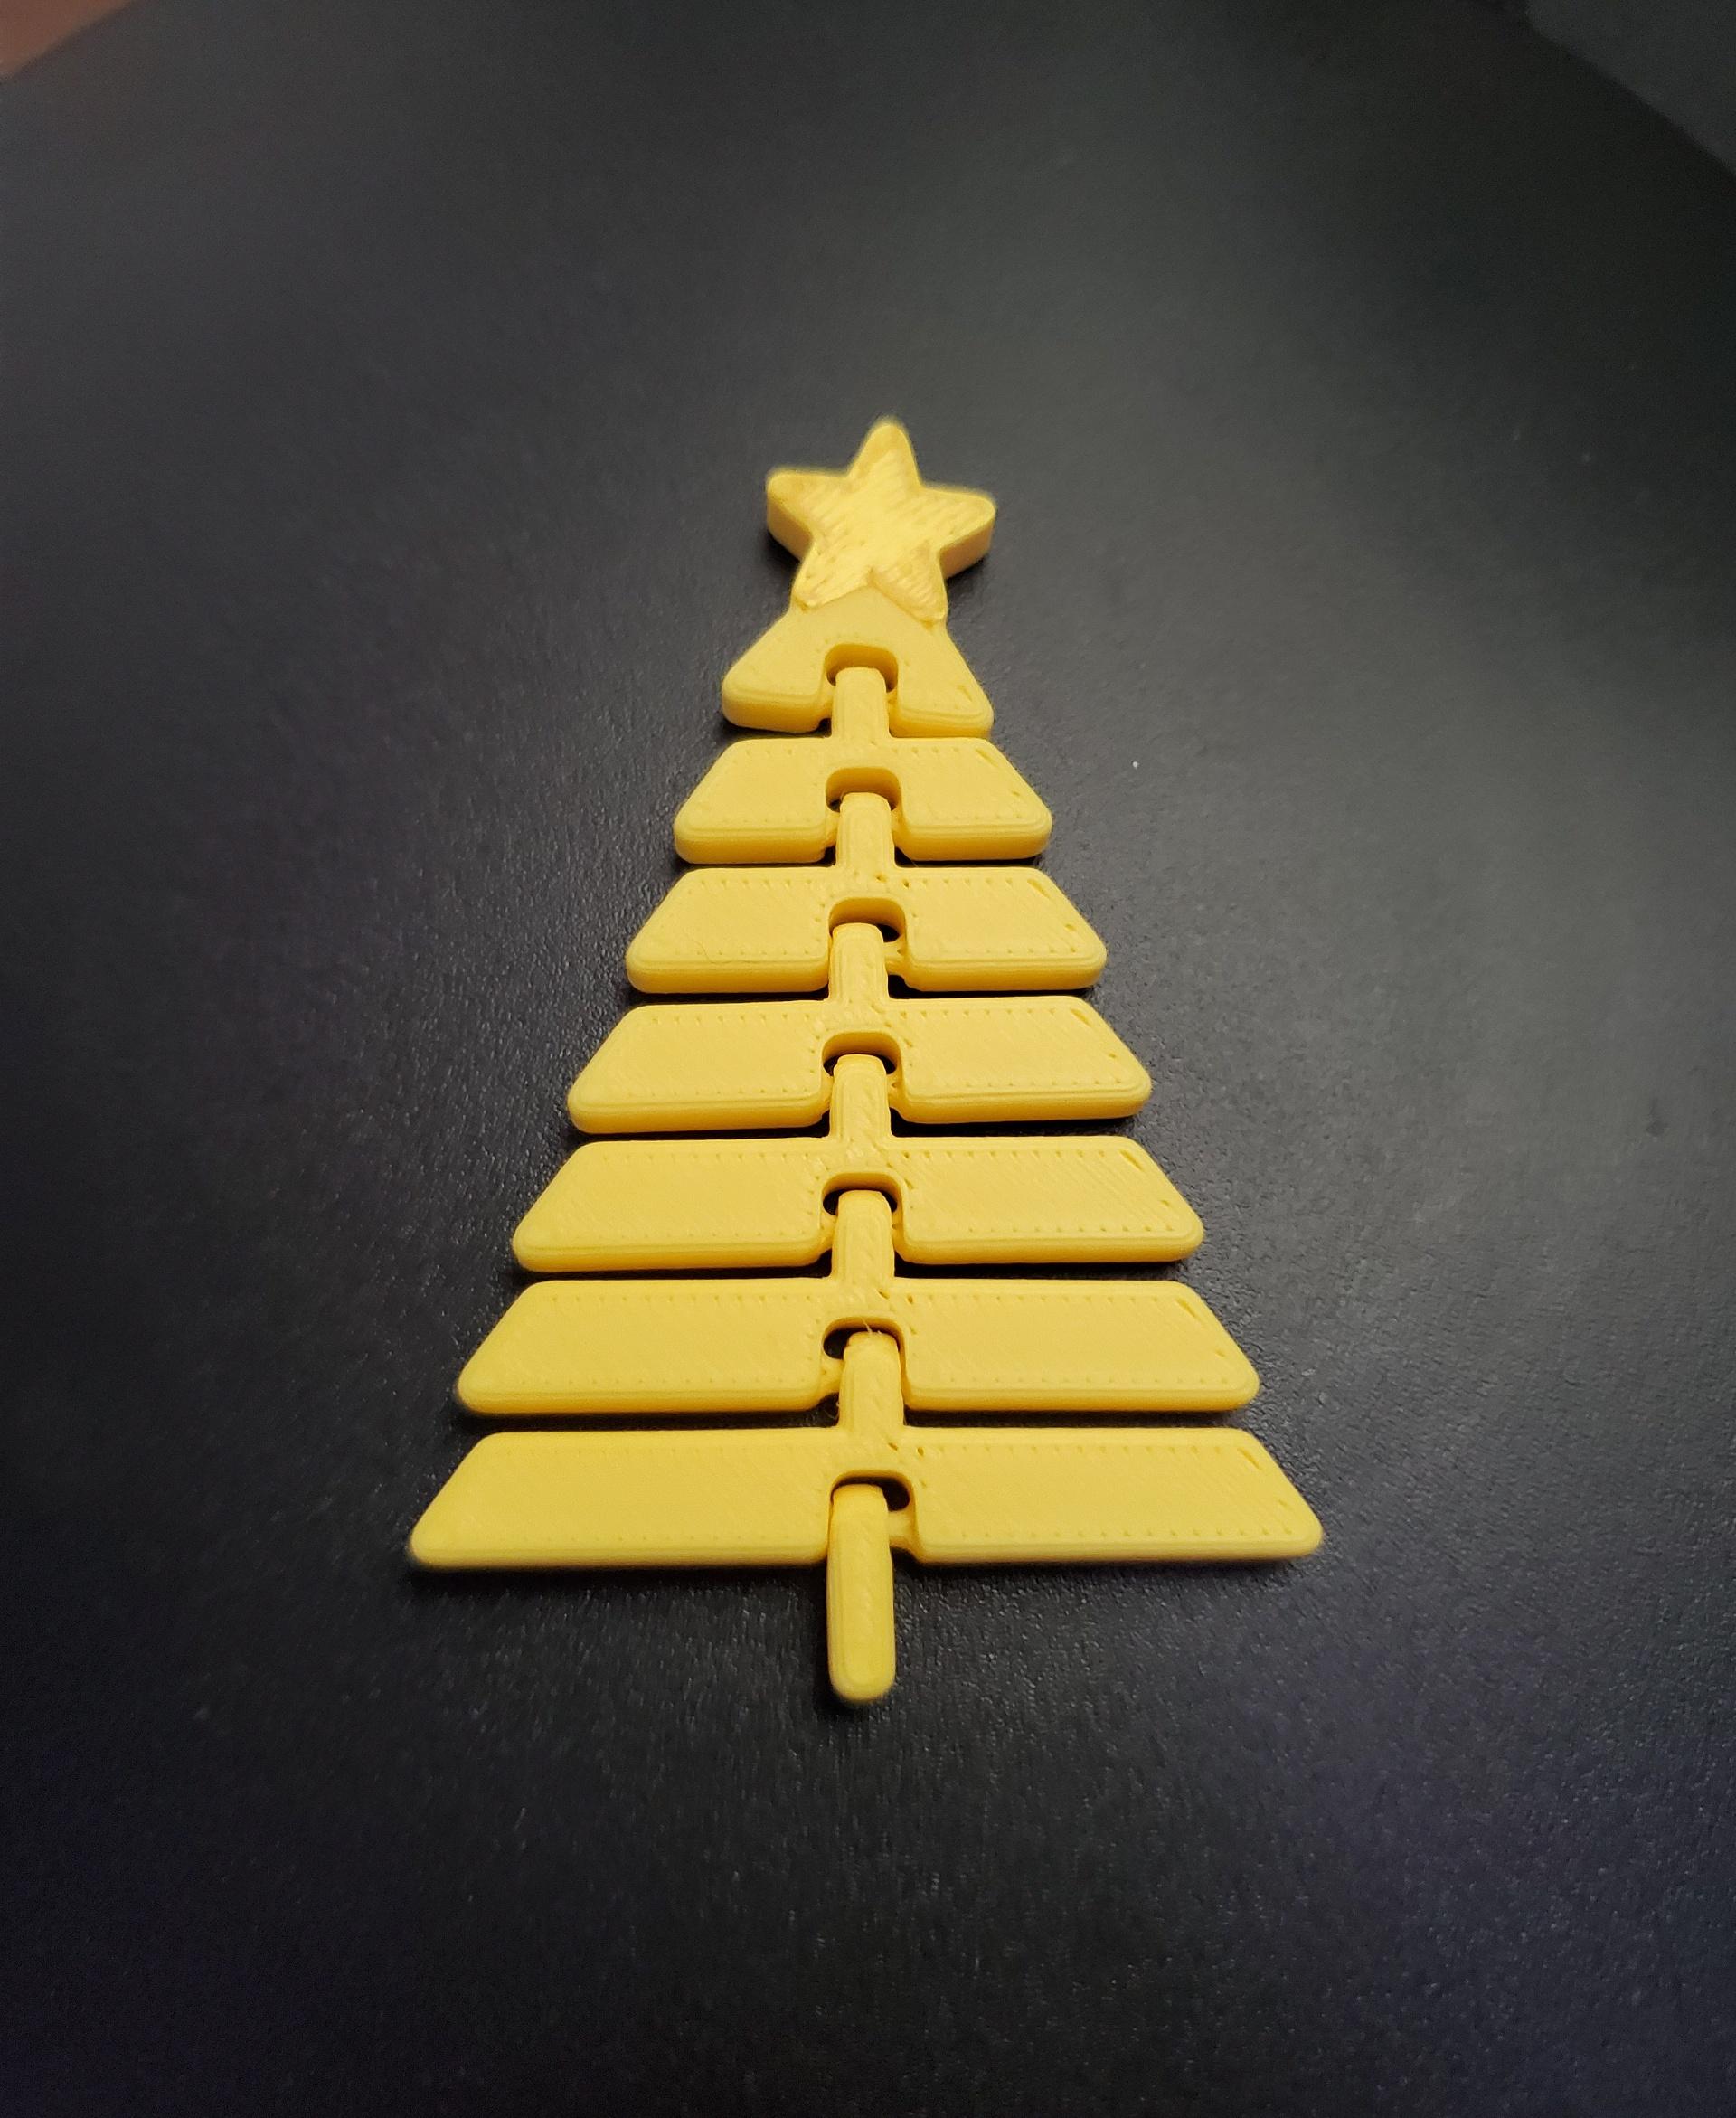 Articulated Christmas Tree with Star - Print in place fidget toy - 3mf - polyterra savannah yellow - 3d model